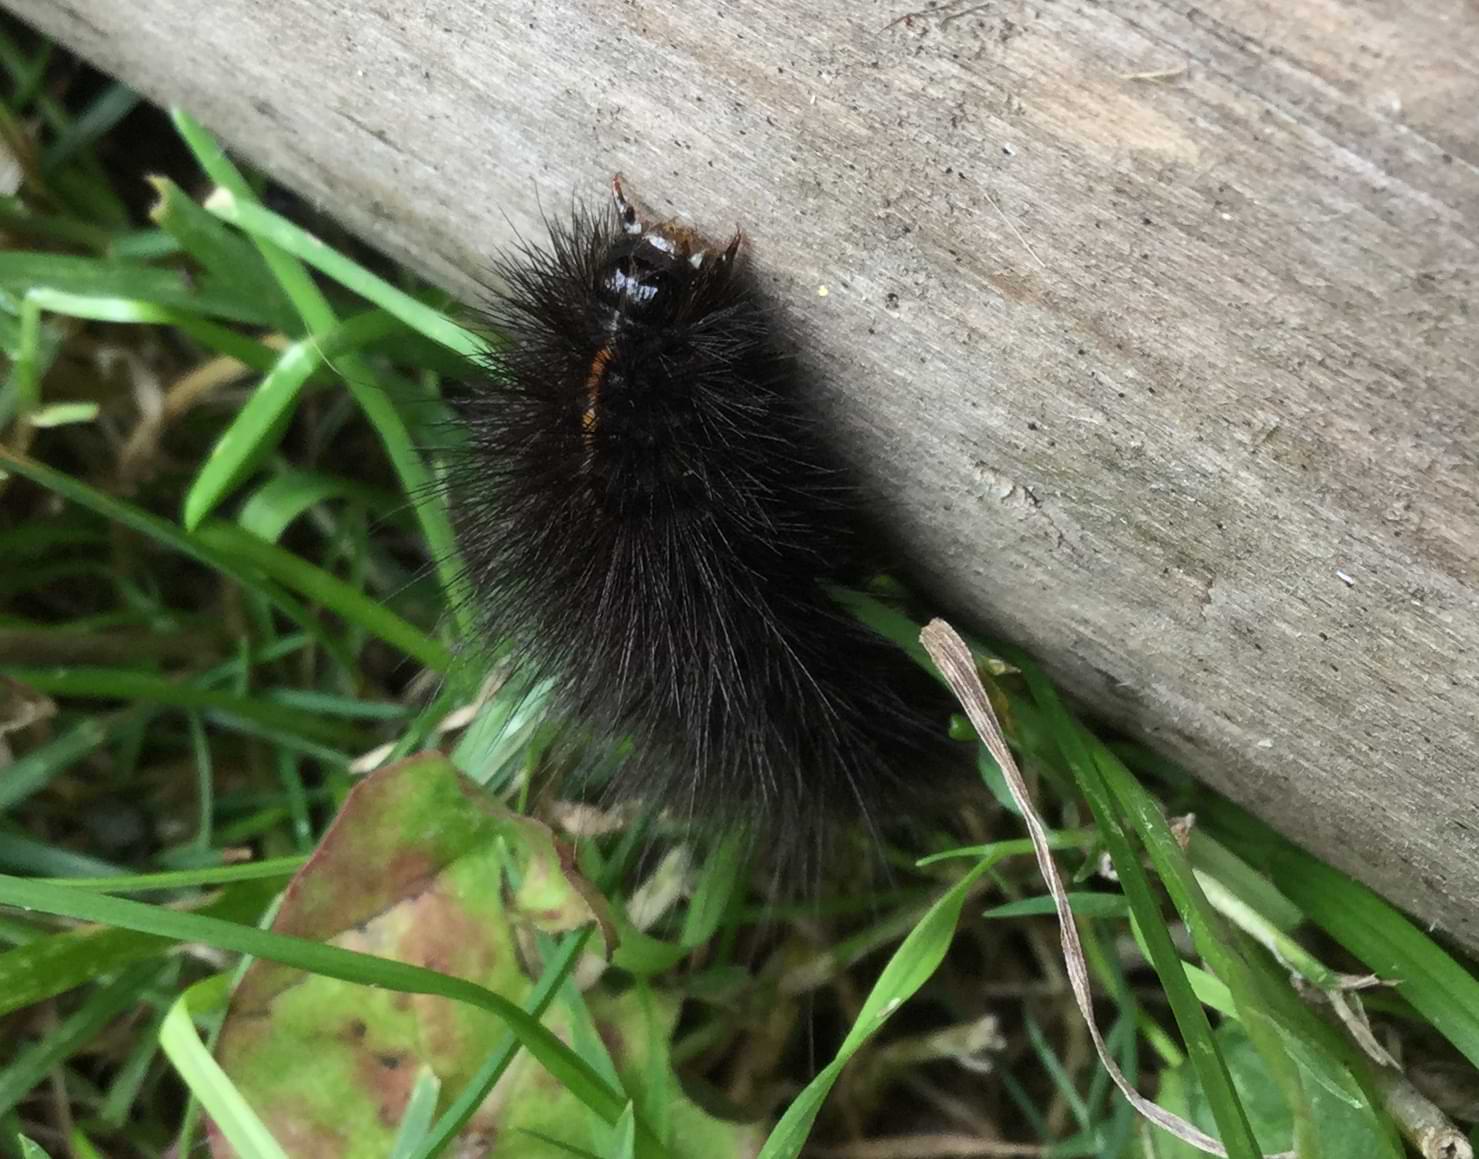 A very hairy black caterpillar crawling up a log. Just barely visible is its head which has two pin-like legs at the front.